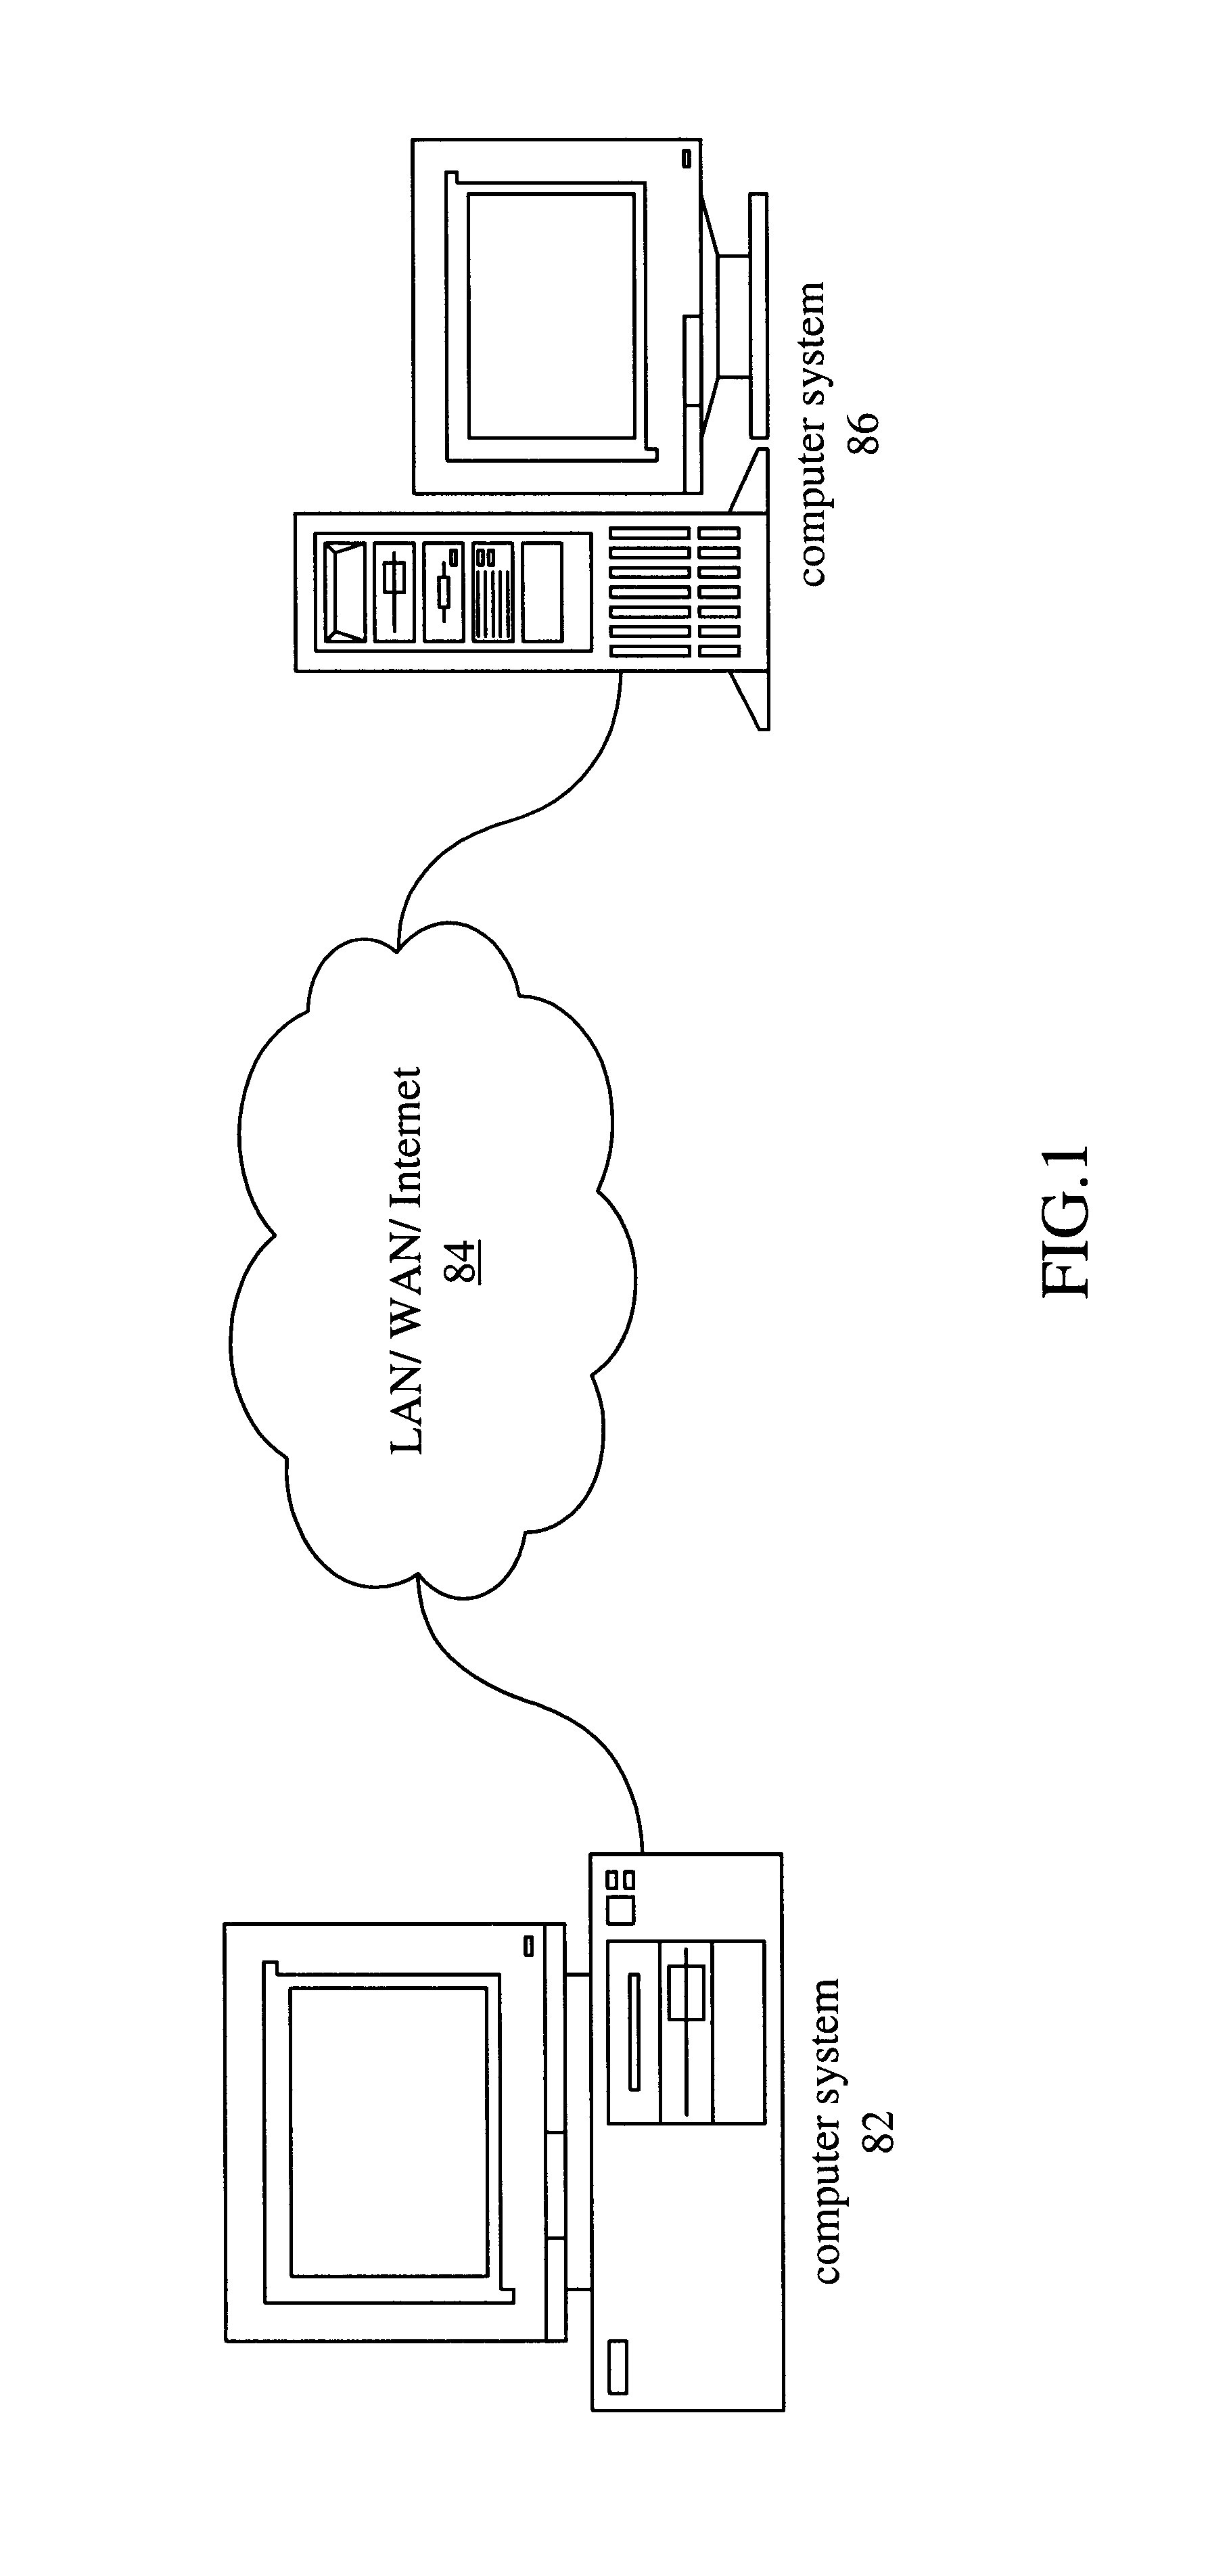 System and method for a shared memory architecture for high speed logging and trending